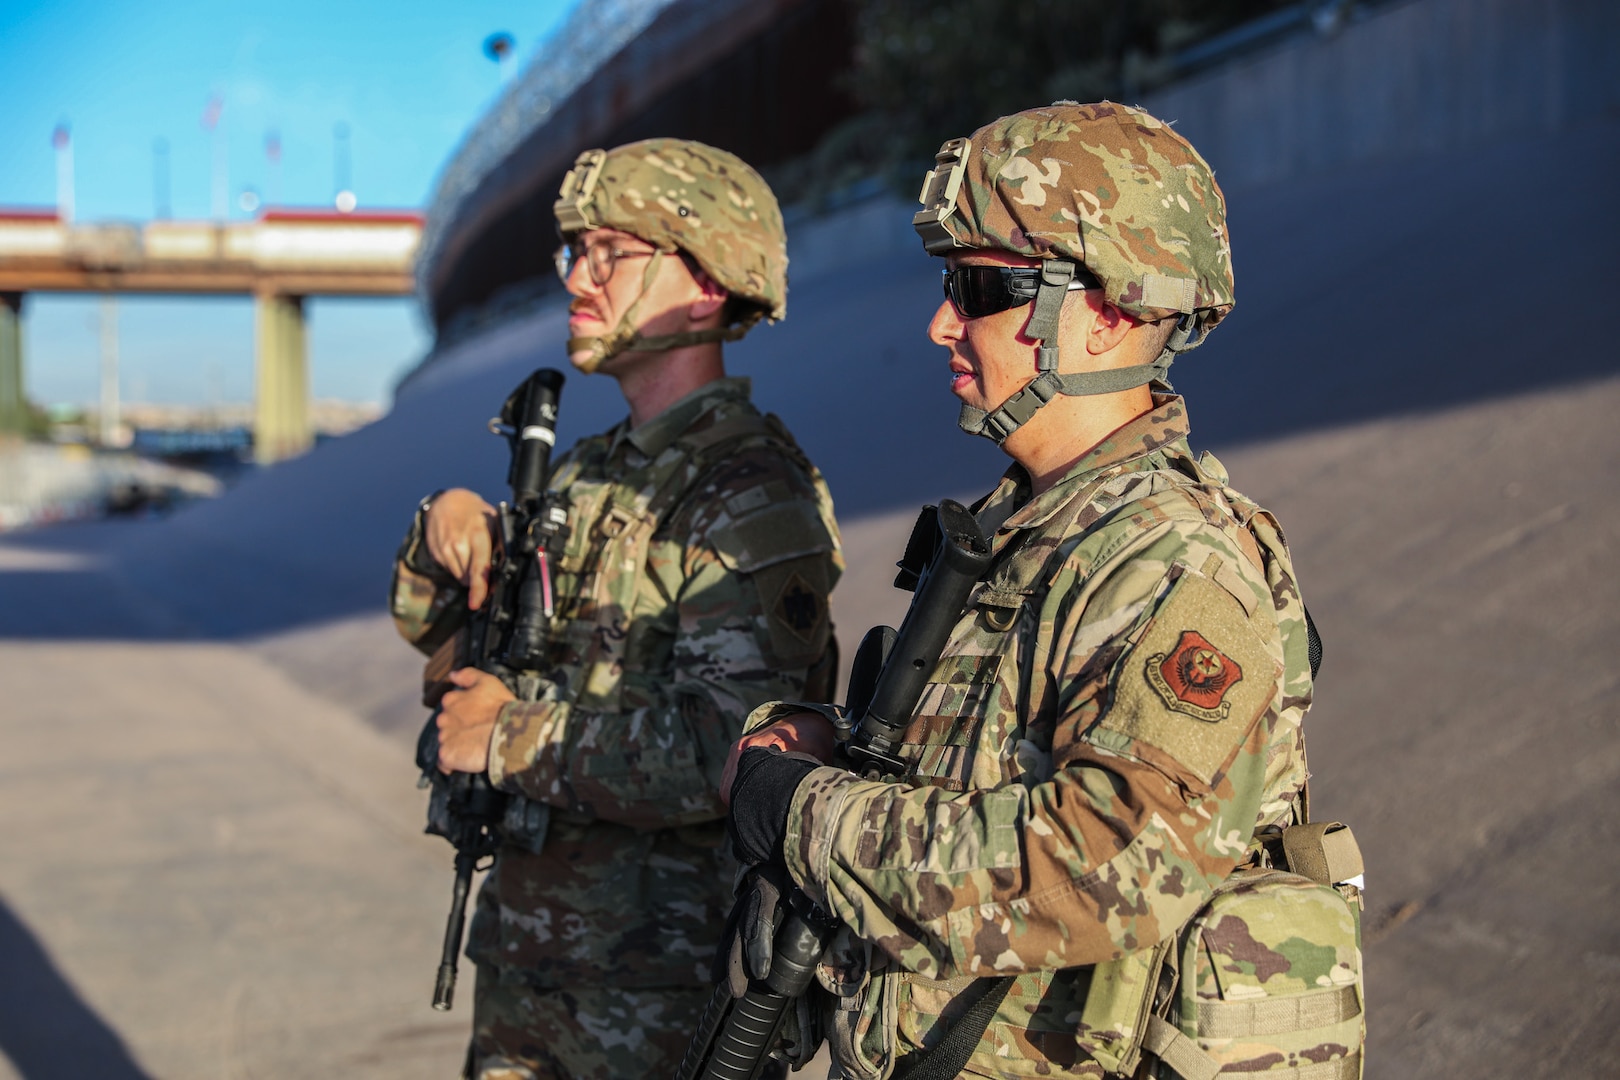 Members of the Oklahoma National Guard, Spc. Darrell Casey (left), member of 1st Battalion, 160th Field Artillery Regiment, 45th Infantry Brigade Combat Team, and Staff Sgt. Patrick Sanchez (right), member of the 137th Special Operations Wing, perform border operations along the Rio Grande River, August 2, 2023. Approximately 50 Soldiers and Airmen are assisting the Texas National Guard with border security by manning security points to identify and alert local law enforcement of any illegal immigrant or drug trafficking activities. The deployment is expected to last through the end of August with a follow-on deployment of an additional 50 Soldiers and Airmen sometime in 2024. (Oklahoma National Guard photo by Sgt. Reece Heck)